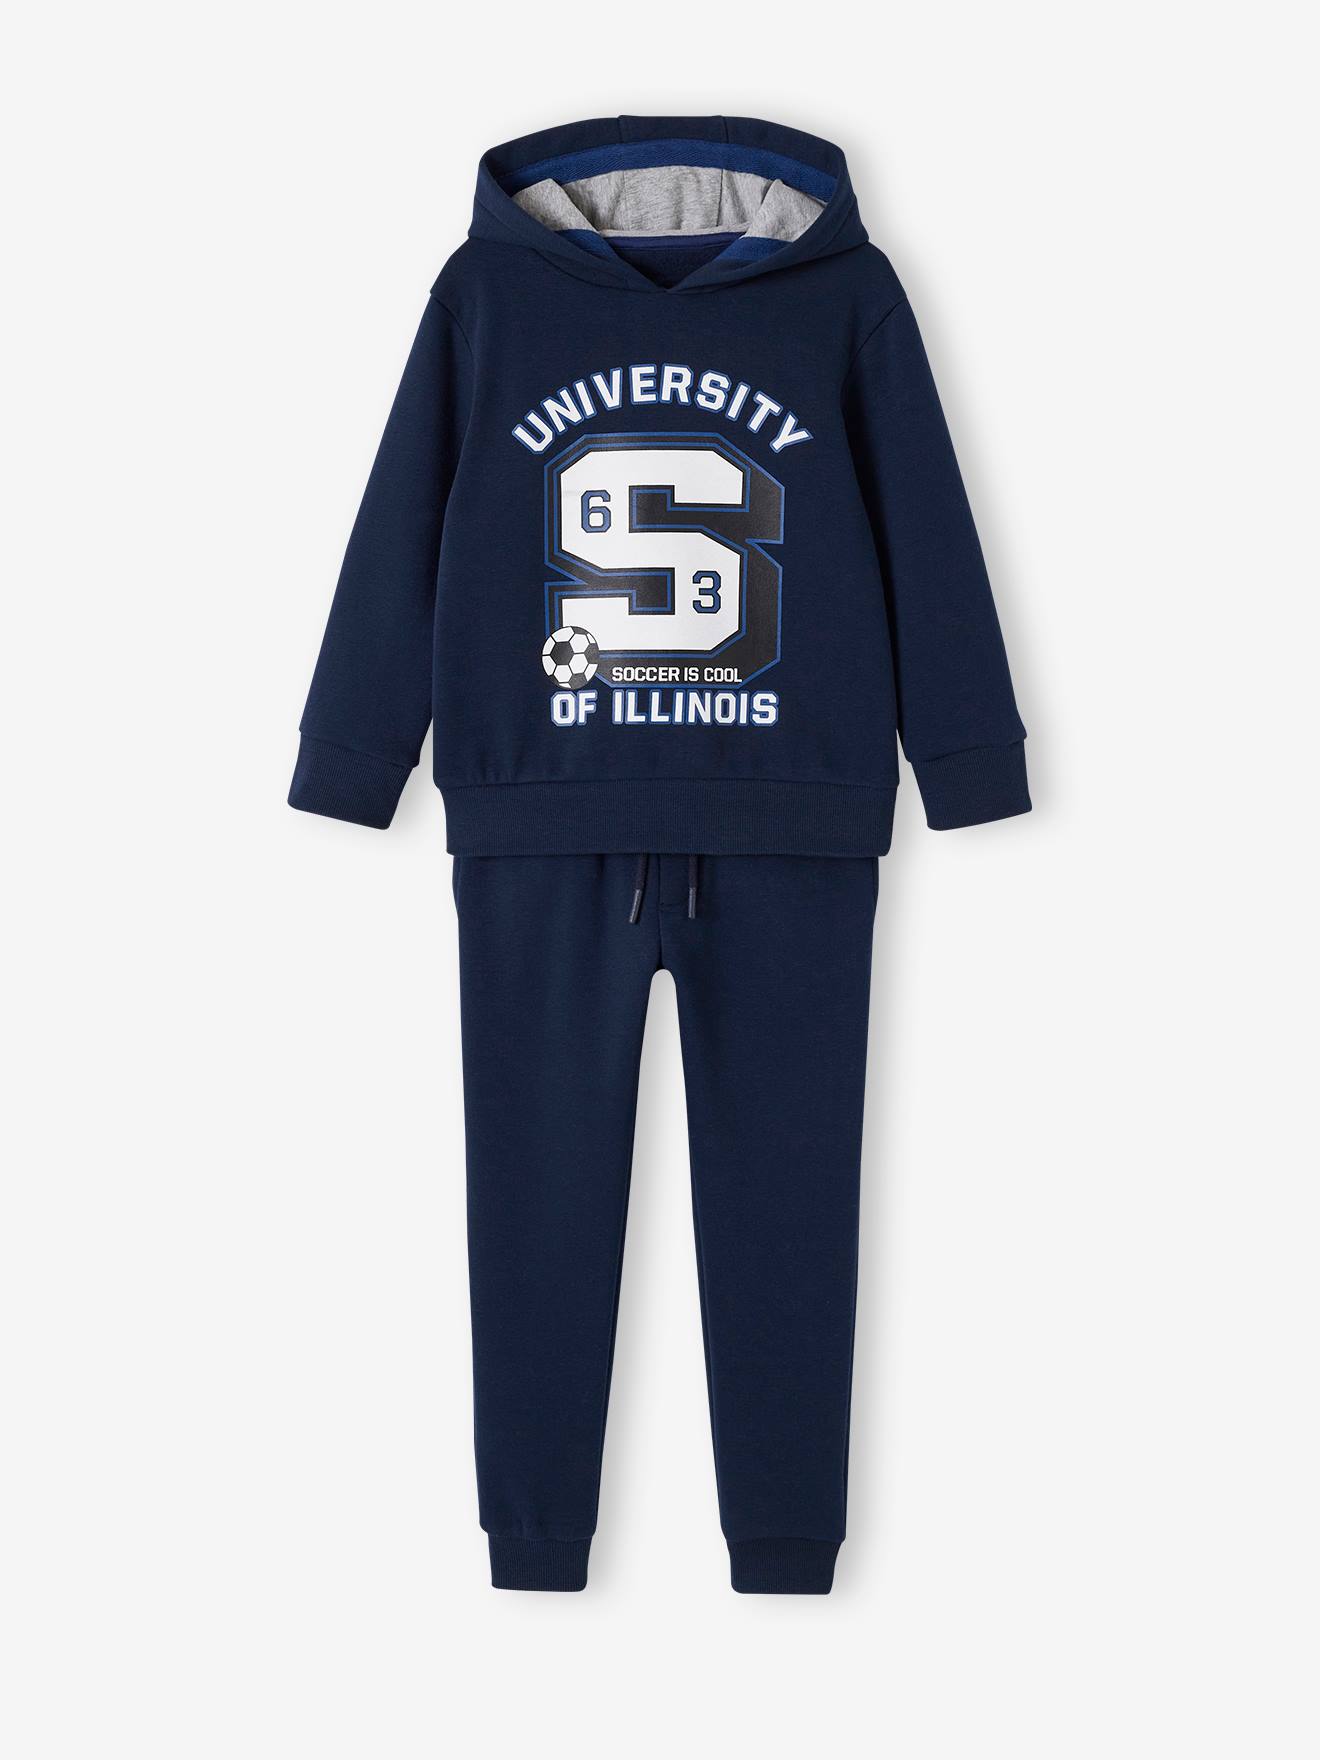 Sports Combo in Fleece, Hoodie + Joggers, for Boys navy blue